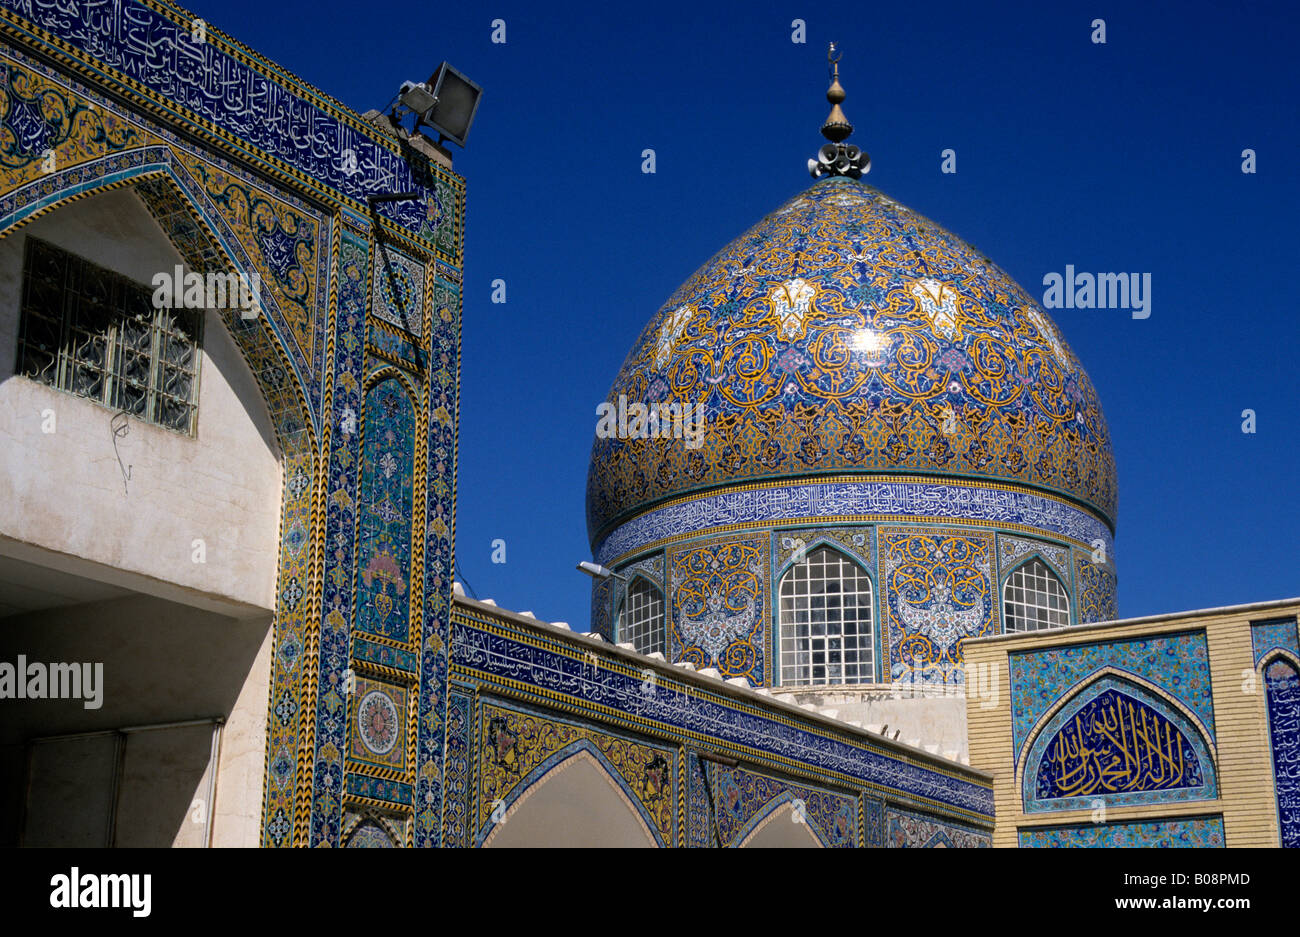 Side cupola, dome of the Akariya Mosque (Golden Mosque) before its destruction in February 2006, Samarra, Iraq, Middle East Stock Photo